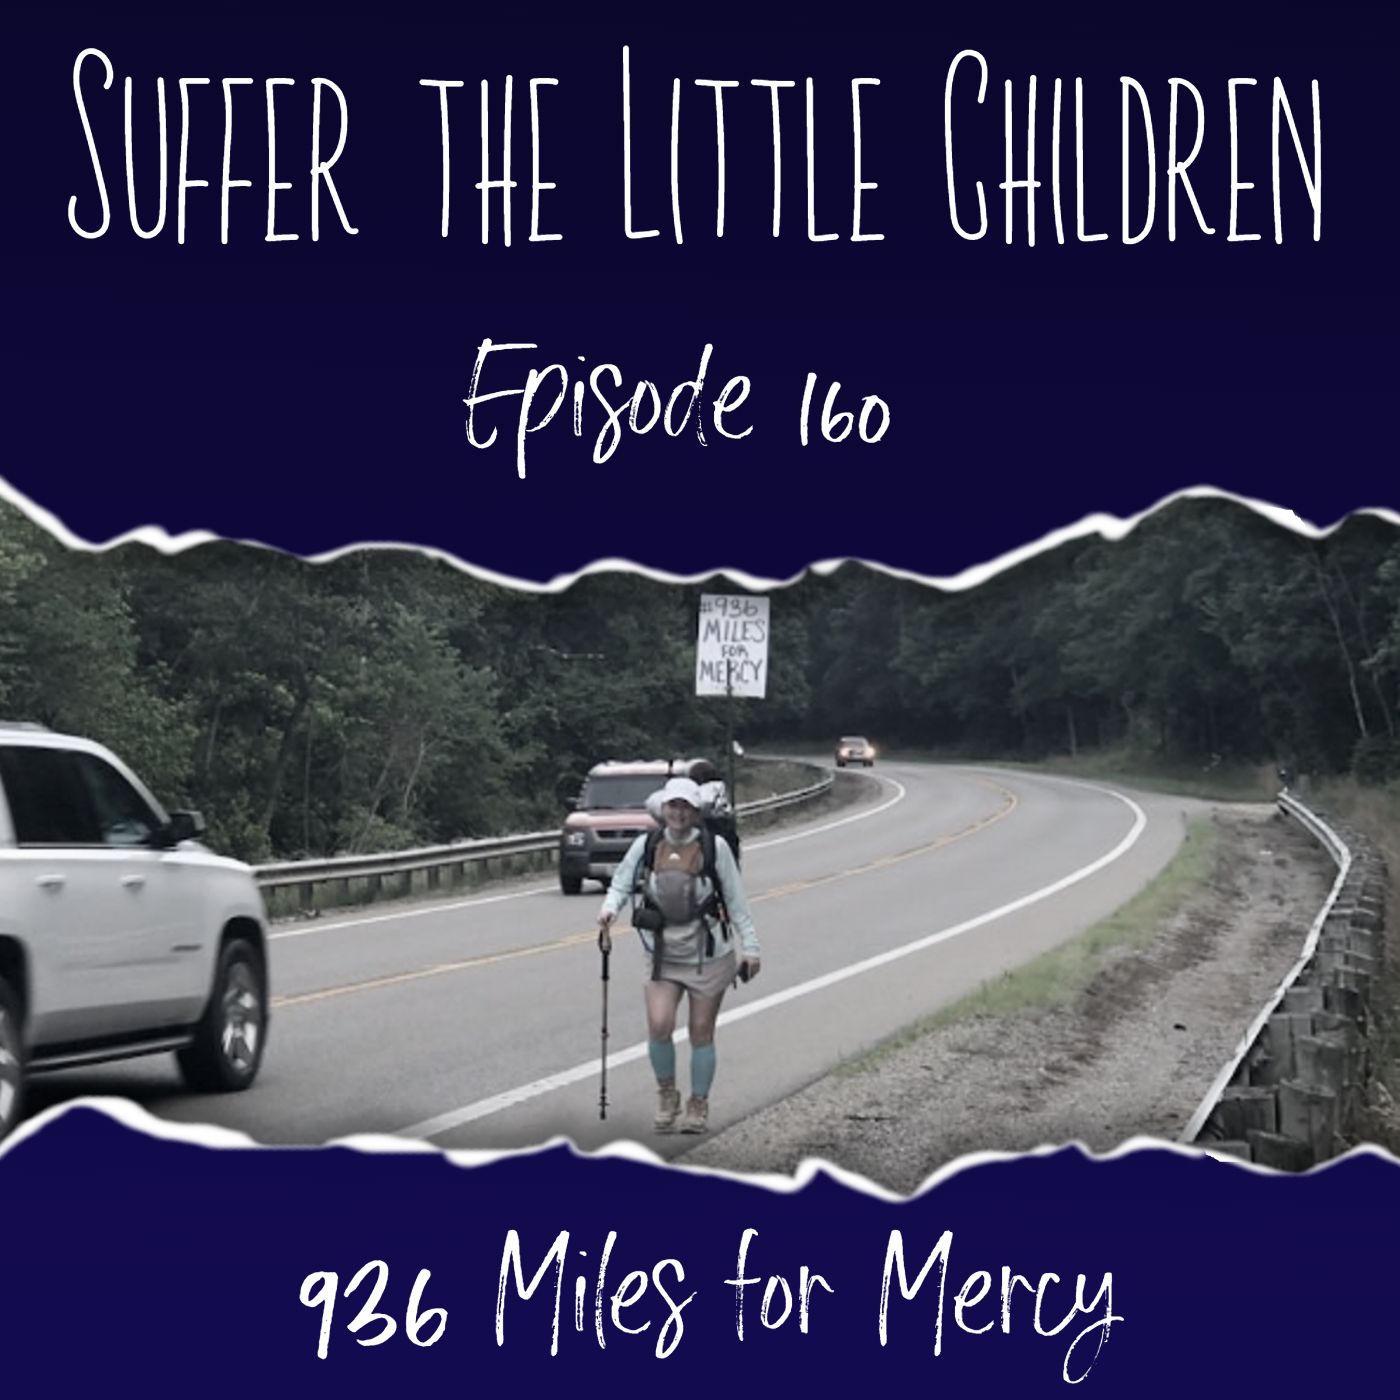 Episode 160: 936 Miles for Mercy